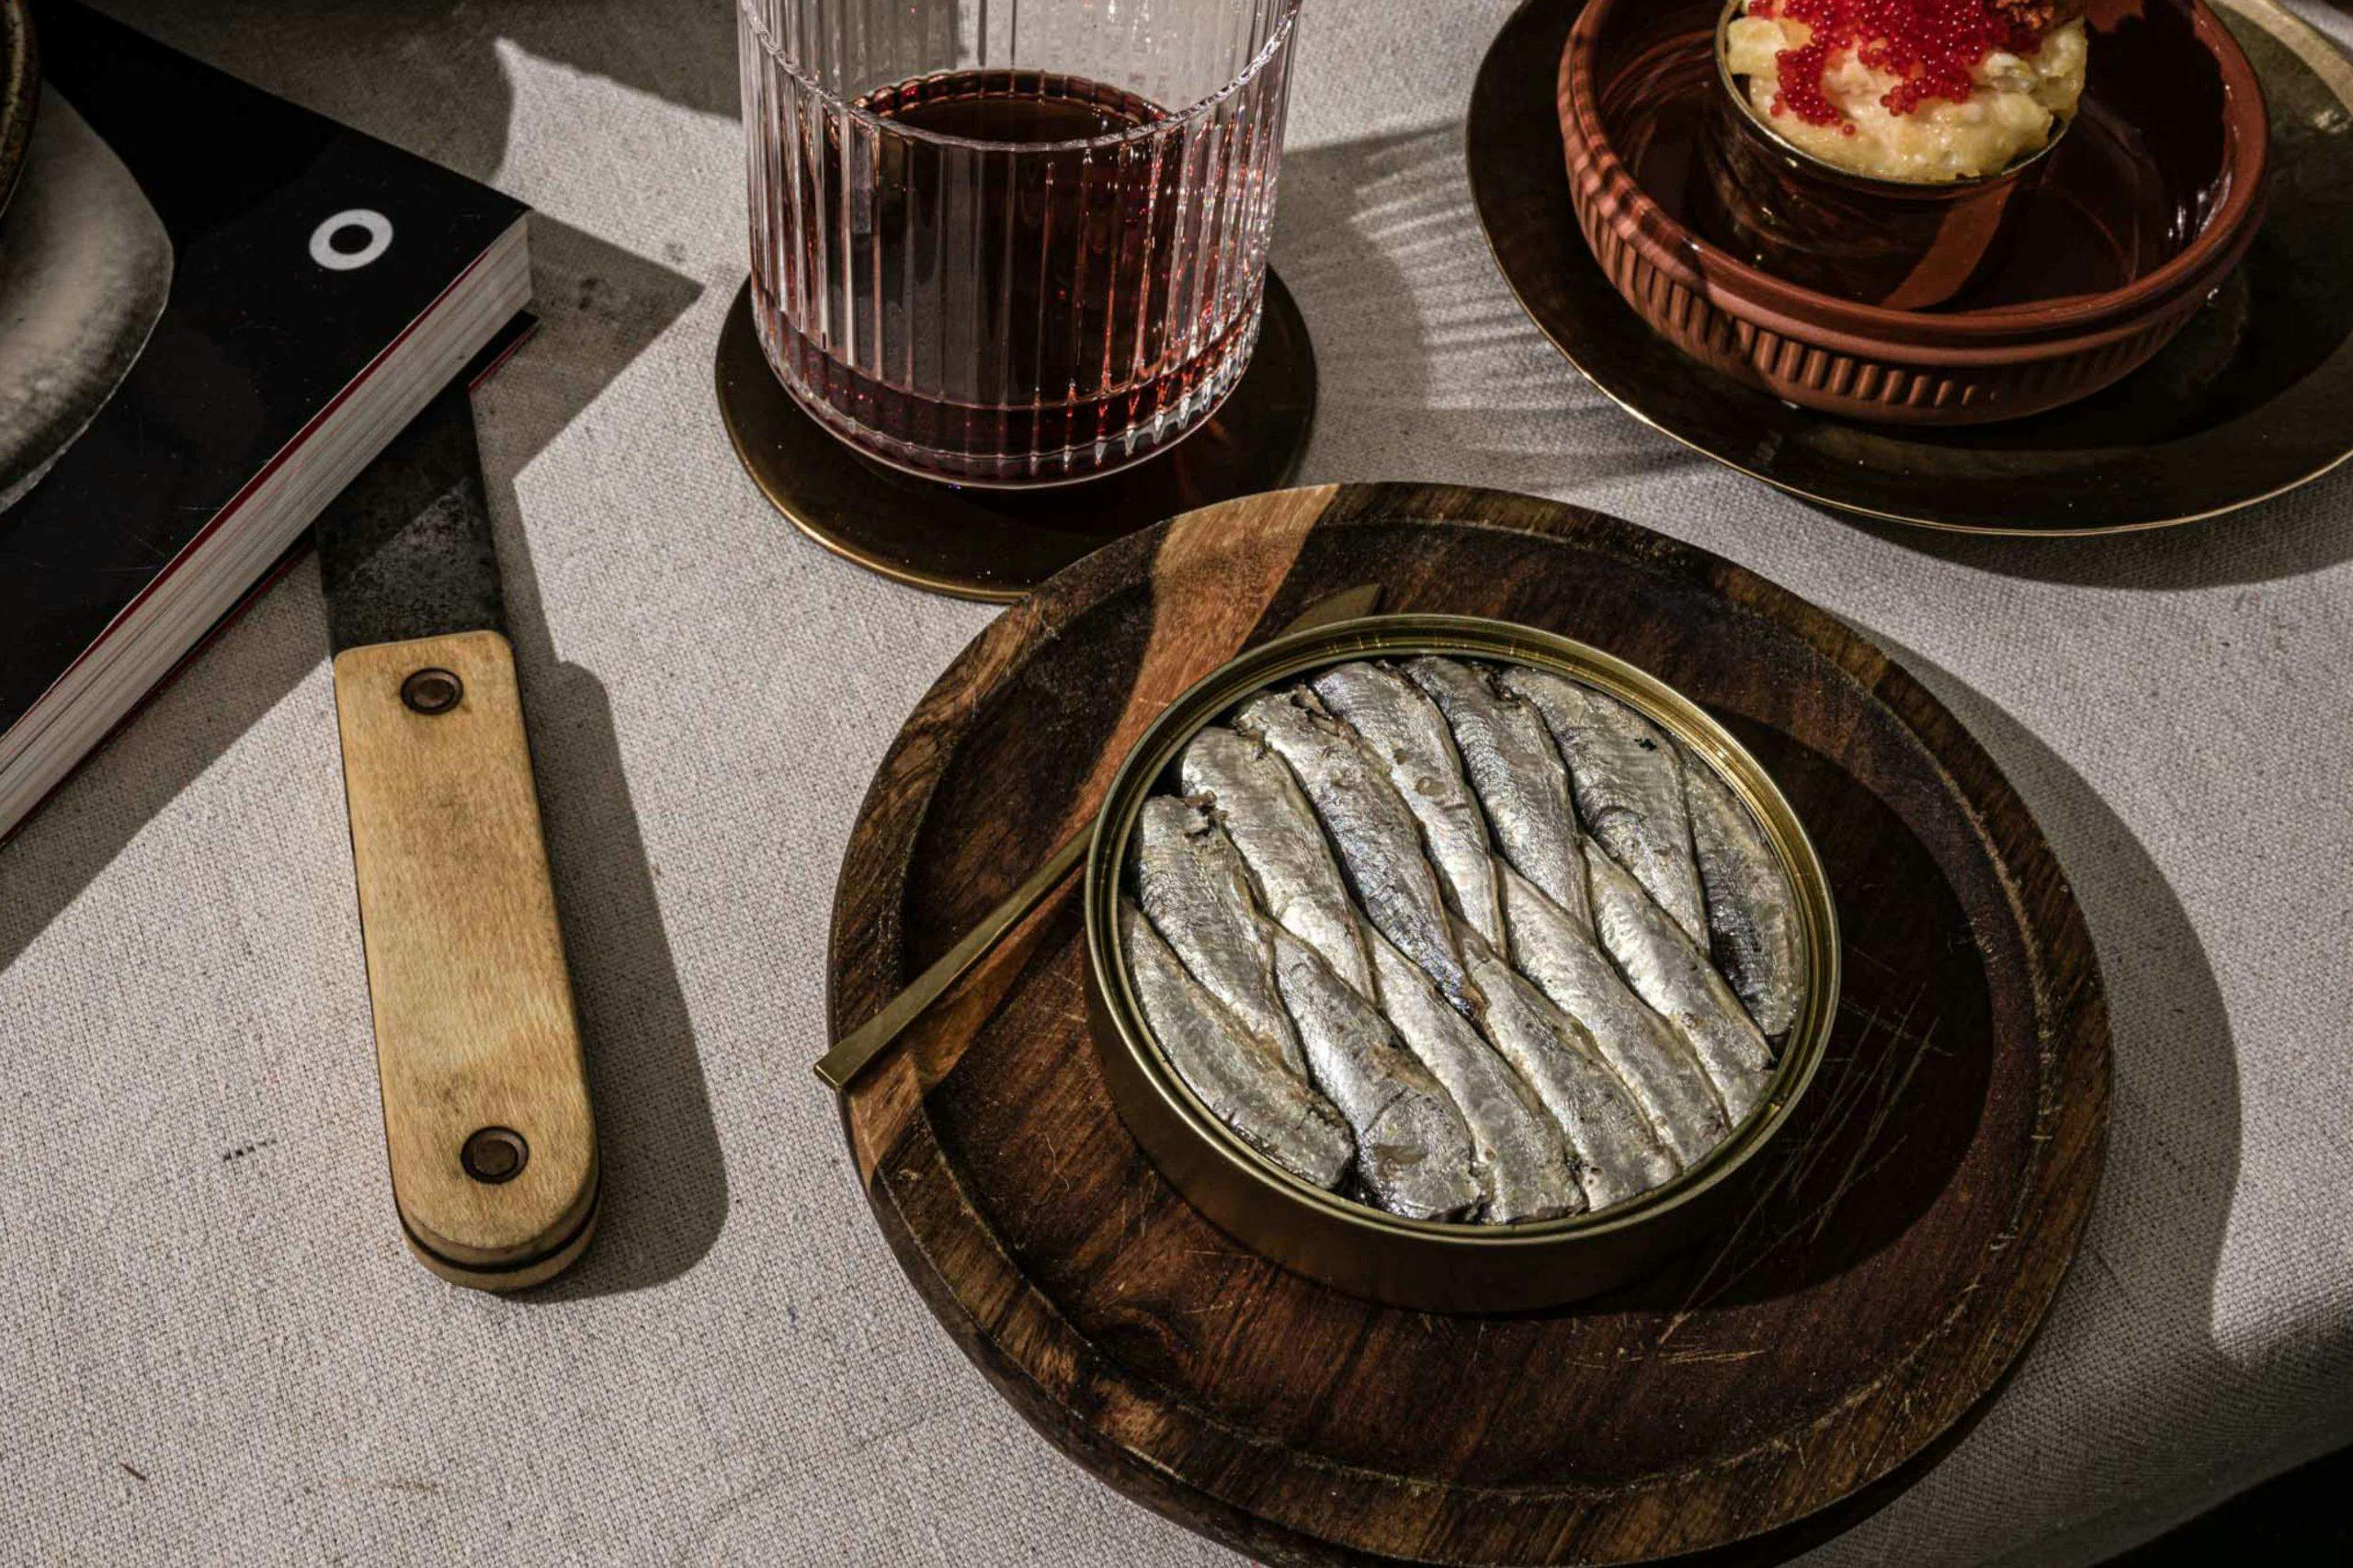 Can of sardines on a wood plate